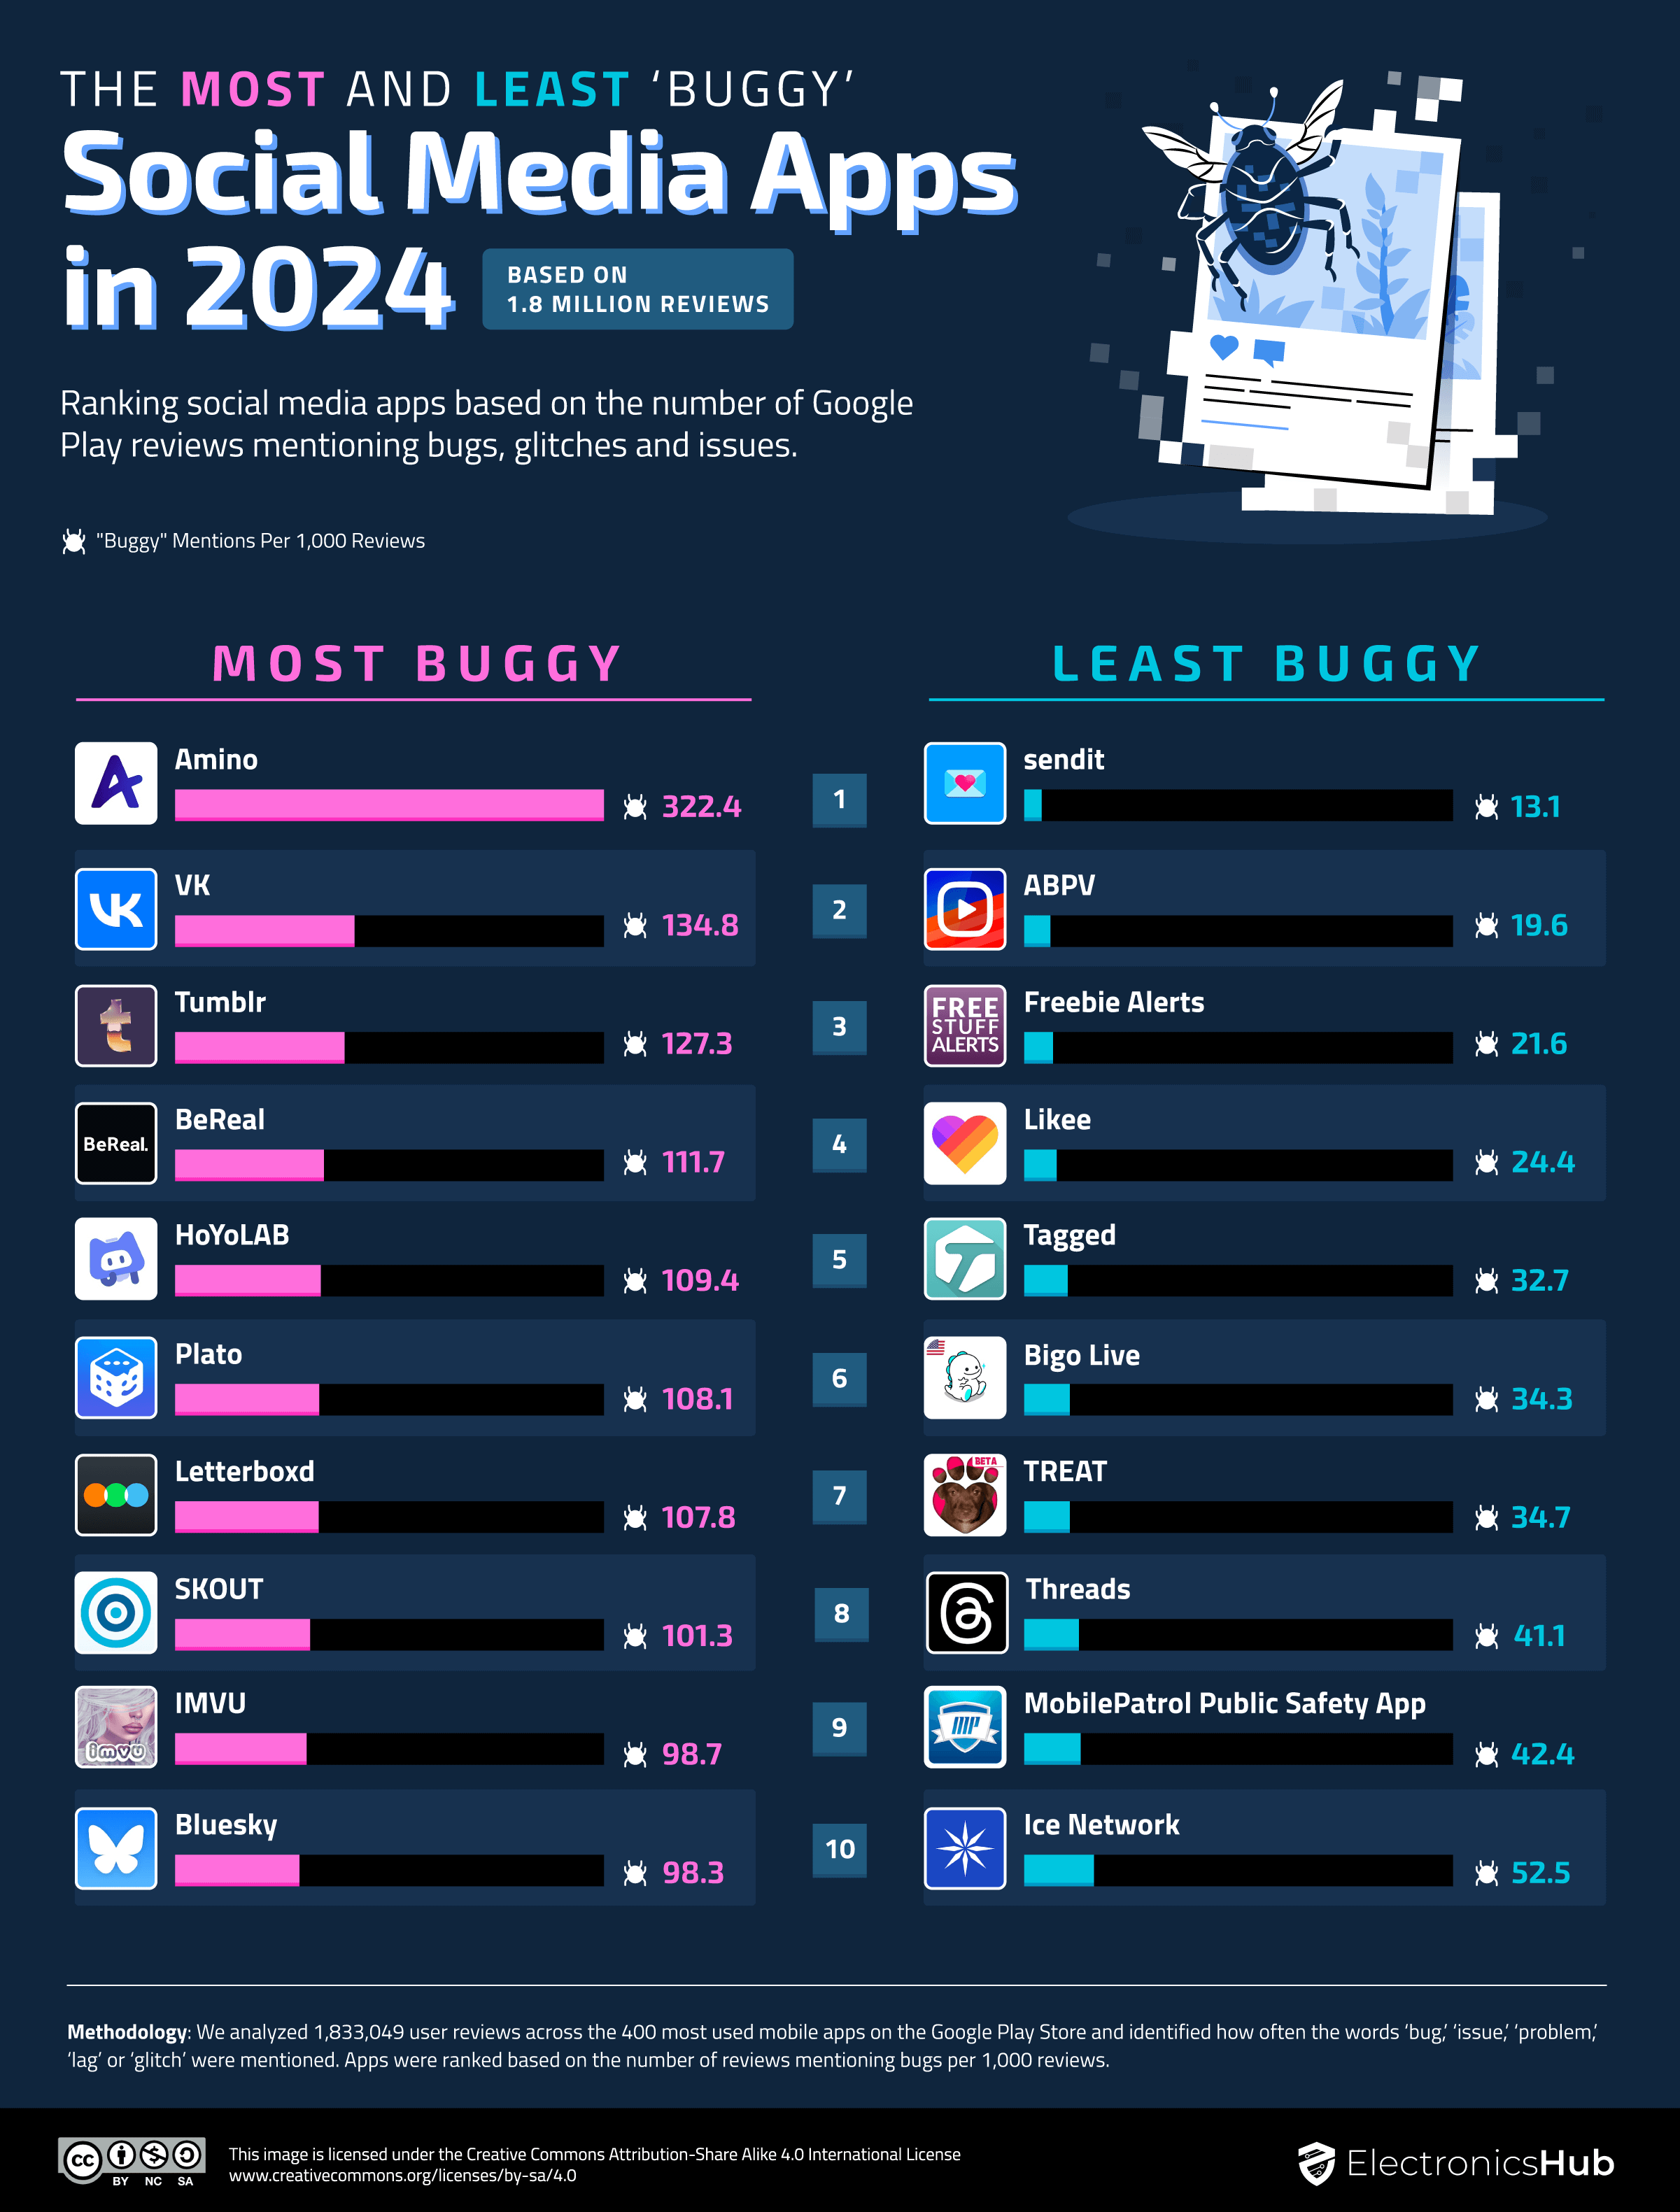 Electronics Hub's research unveils the top bug-ridden and glitch-free social media apps of 2024.